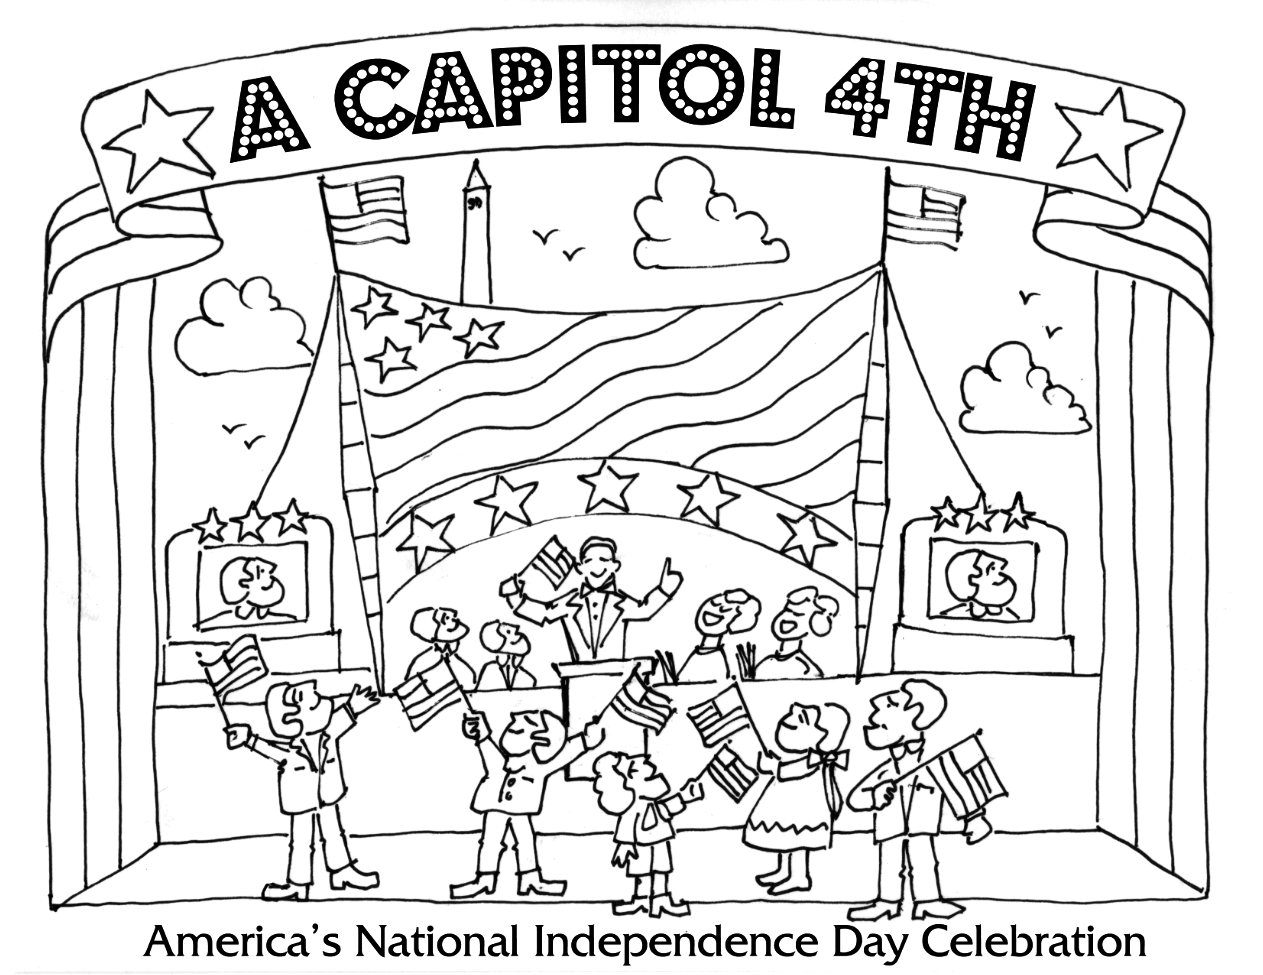 Fourth of July Coloring Pages | A Capitol Fourth | PBS